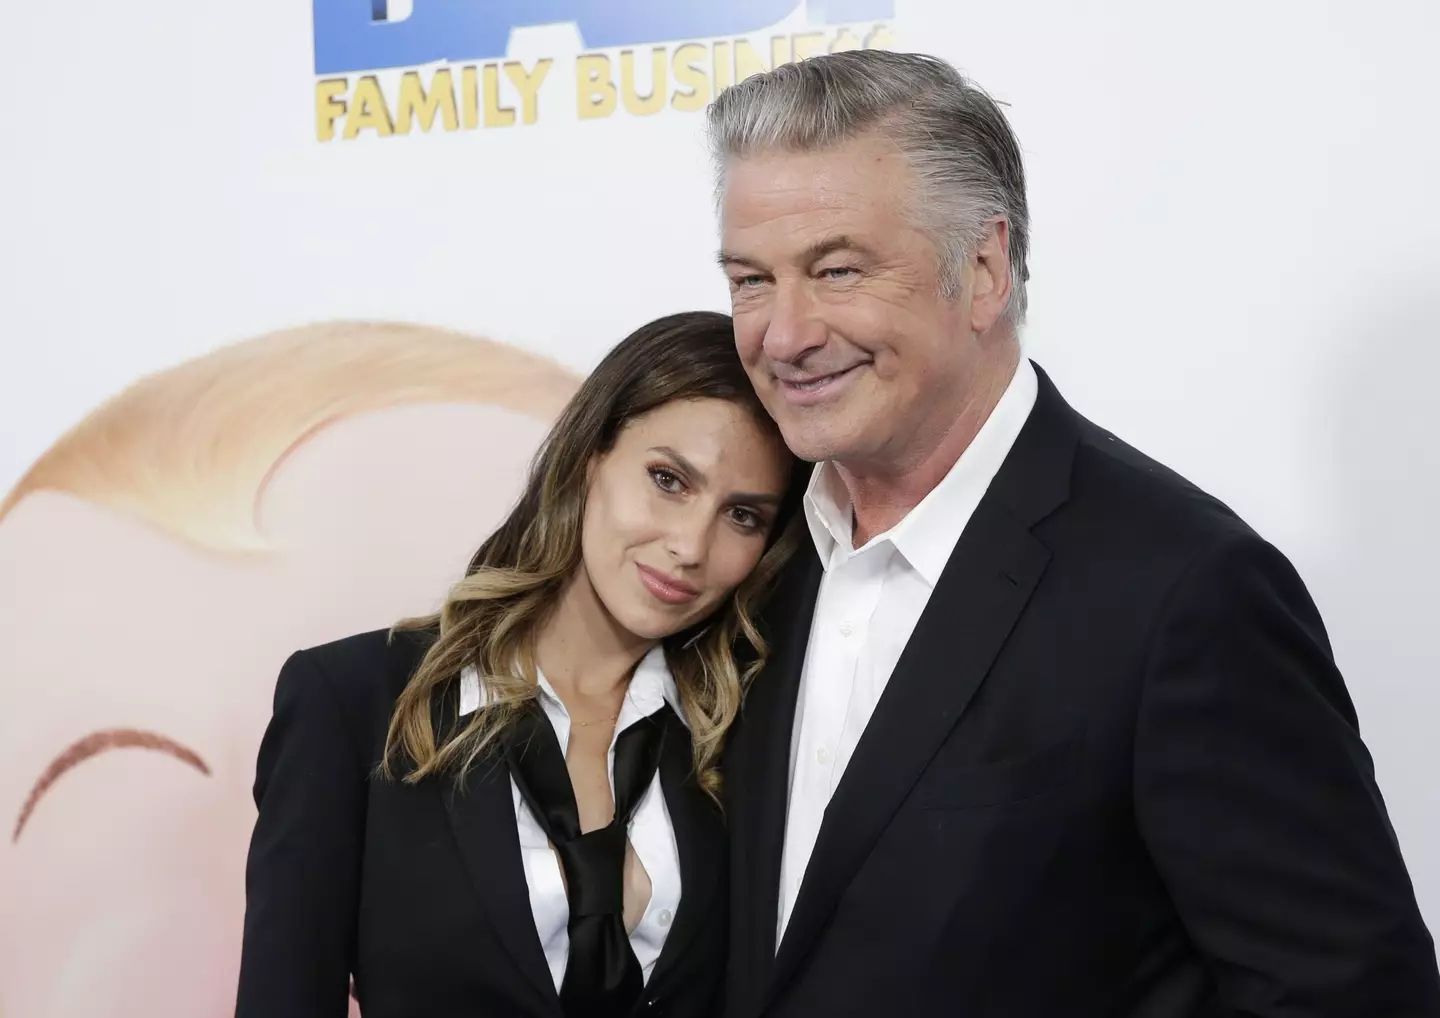 Alec and Hilaria Baldwin married in 2012.